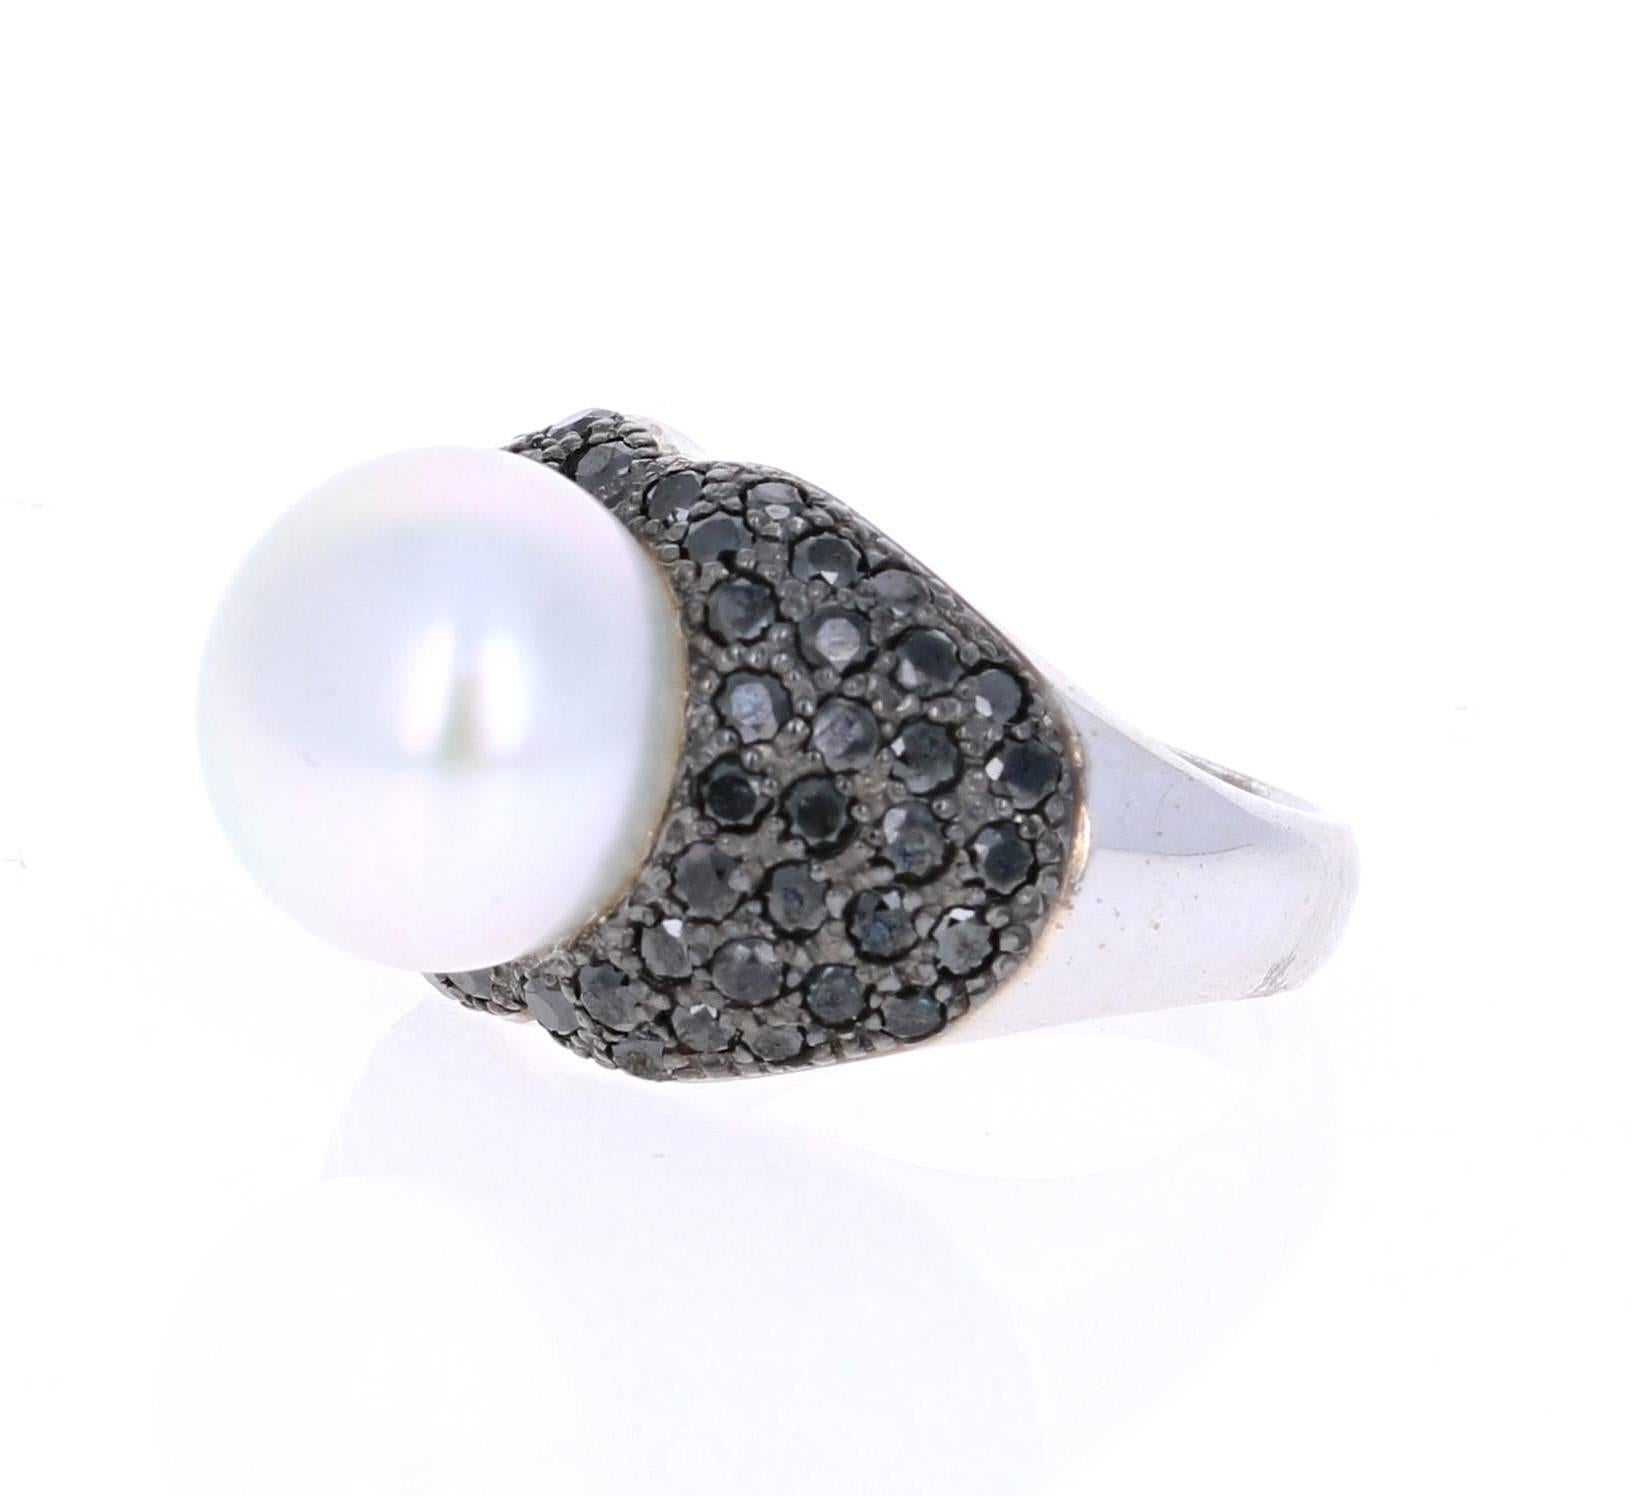 A Gorgeous 1.68 carat South Sea and Black Diamond Cocktail ring that is sure to elevate your look!  There is a beautiful South Sea Pearl in the center of the ring which is surrounded by 60 Black Round Cut Diamonds that give this ring a very elegant